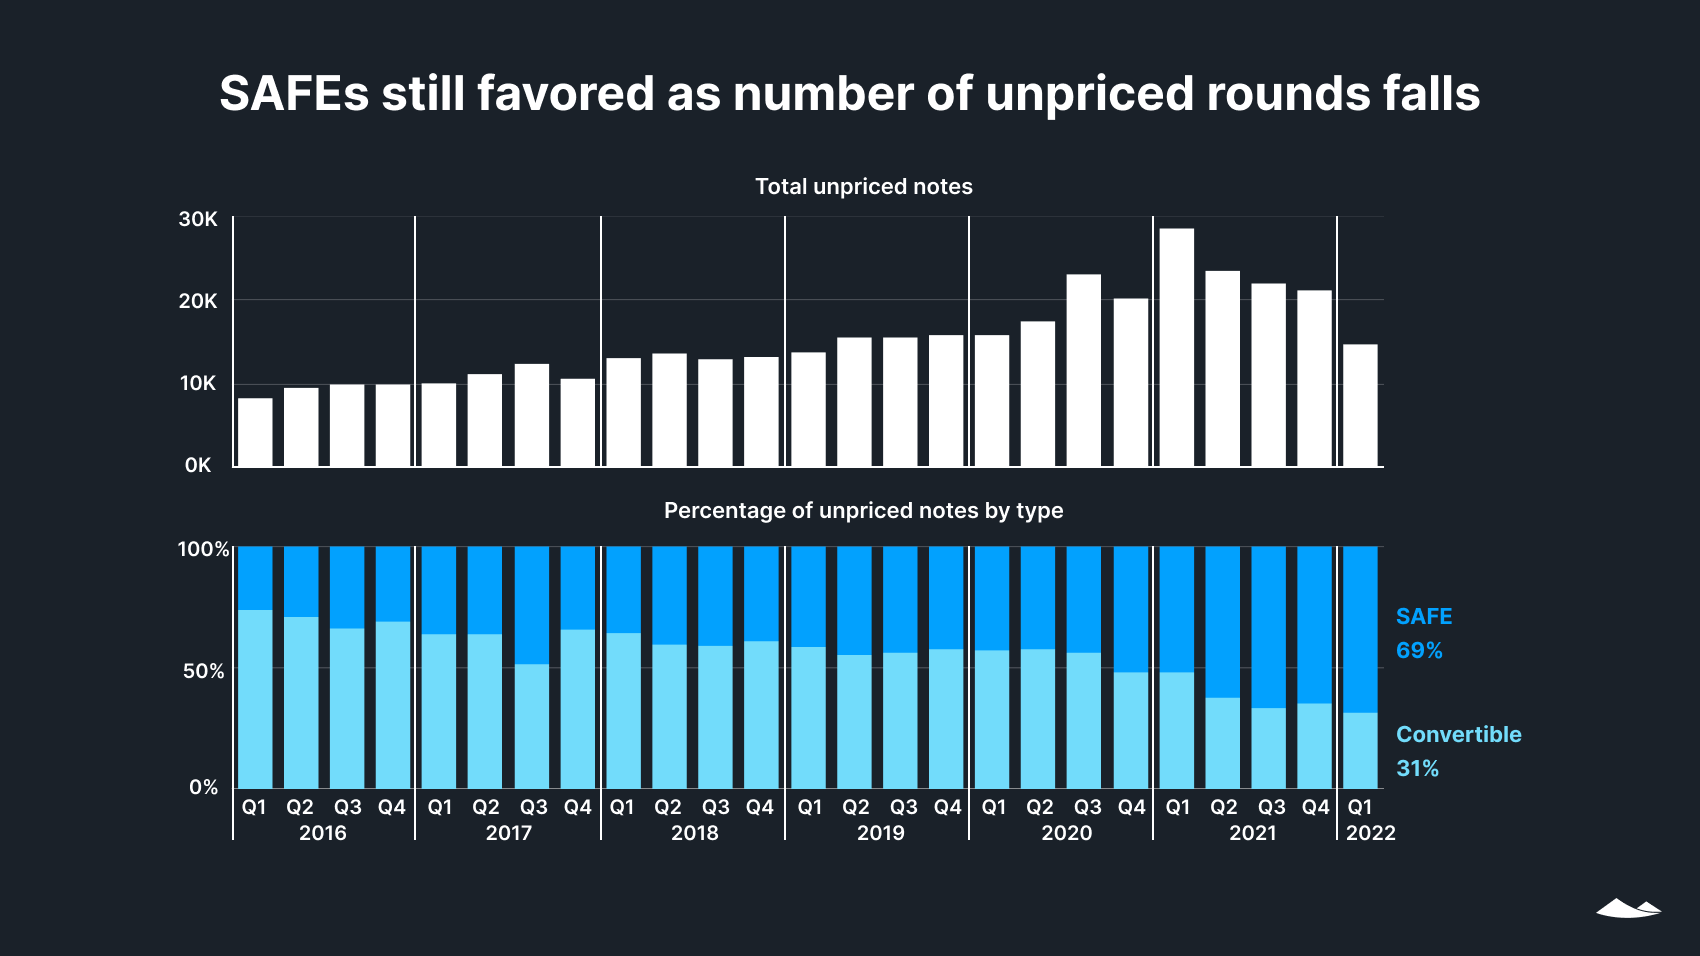 SAFEs still favored as number of unpriced rounds falls